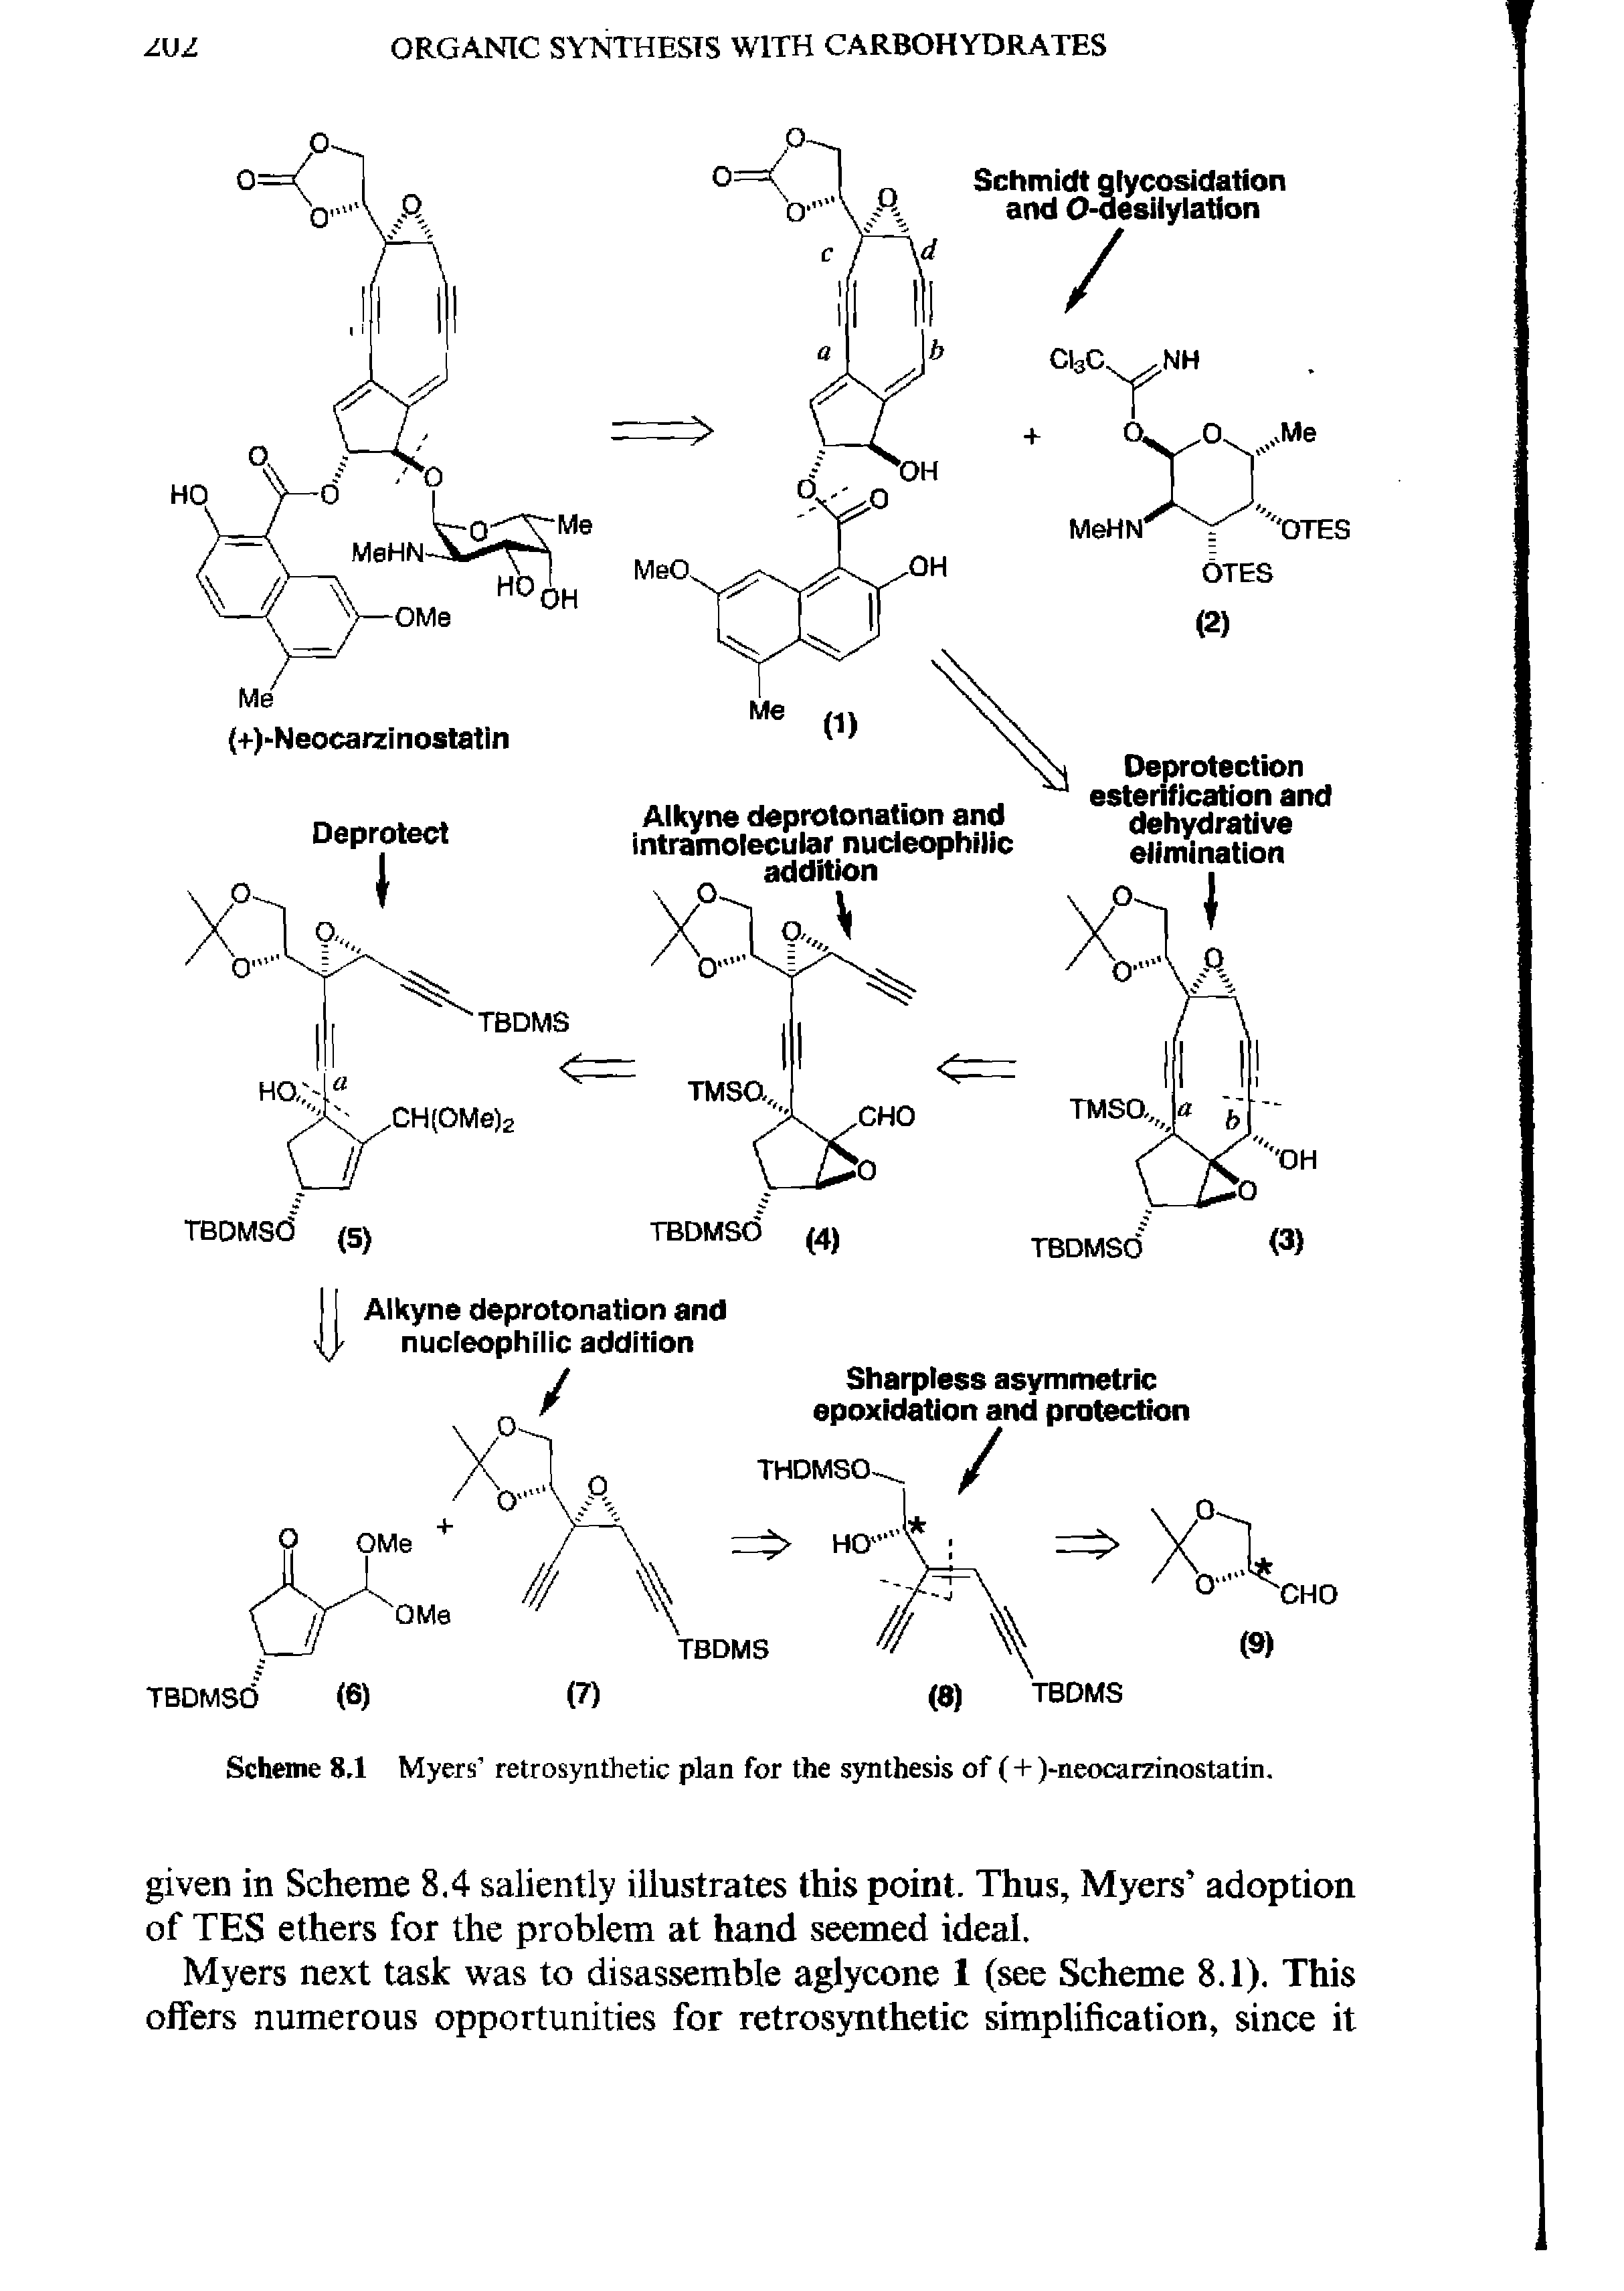 Scheme 8,1 Myers retrosynthetic plan for the synthesis of (+)-neocarzinostatin.